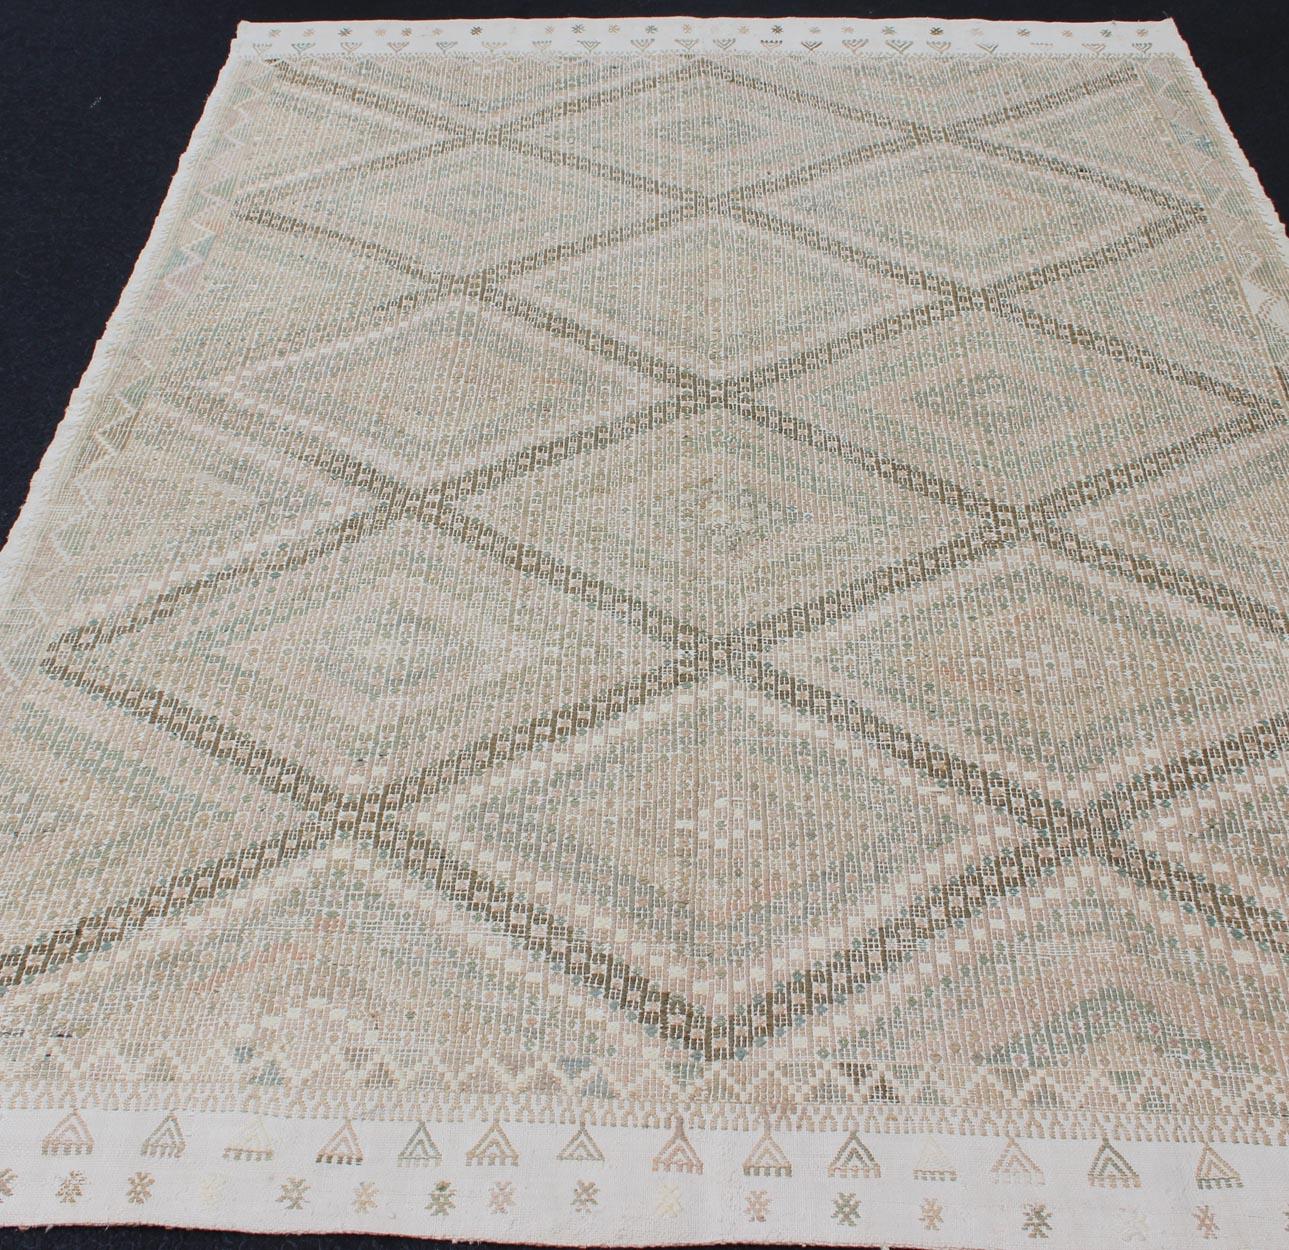 Vintage Turkish Embroidered Rug with Geometric Diamond Design in Light Colors For Sale 2